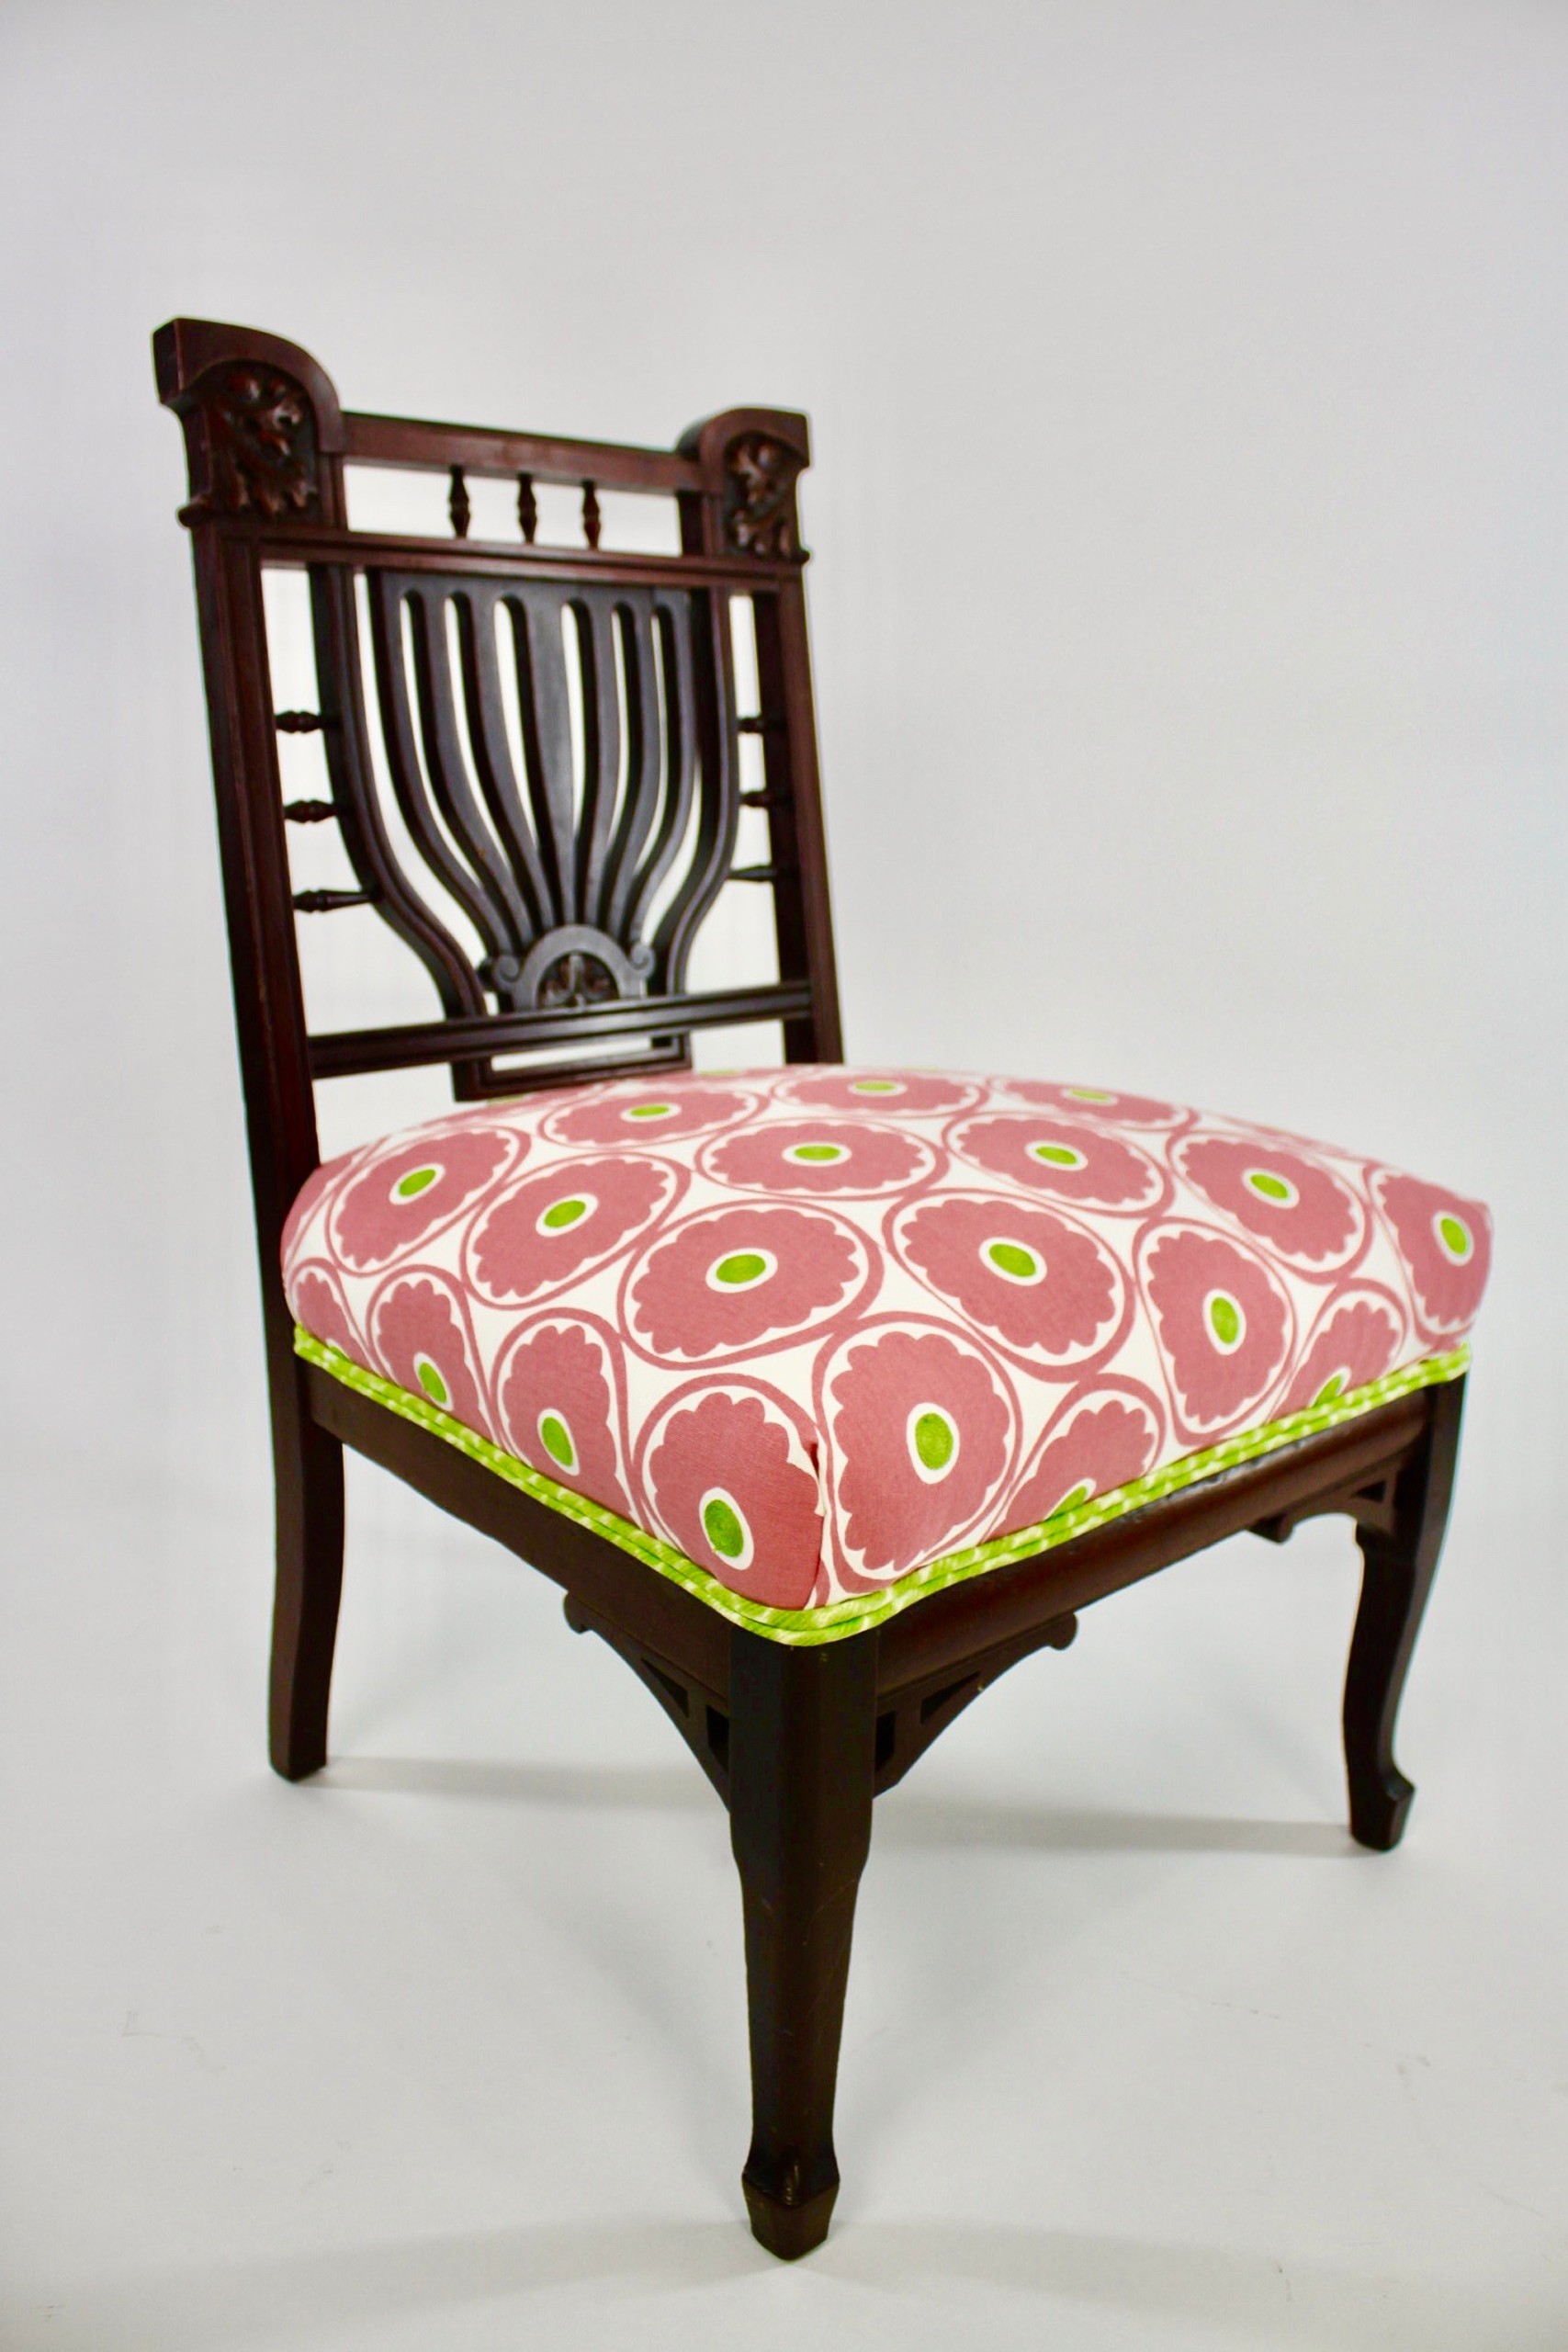 finished reupholstered dining room chair | Final Phase of Reupholstering